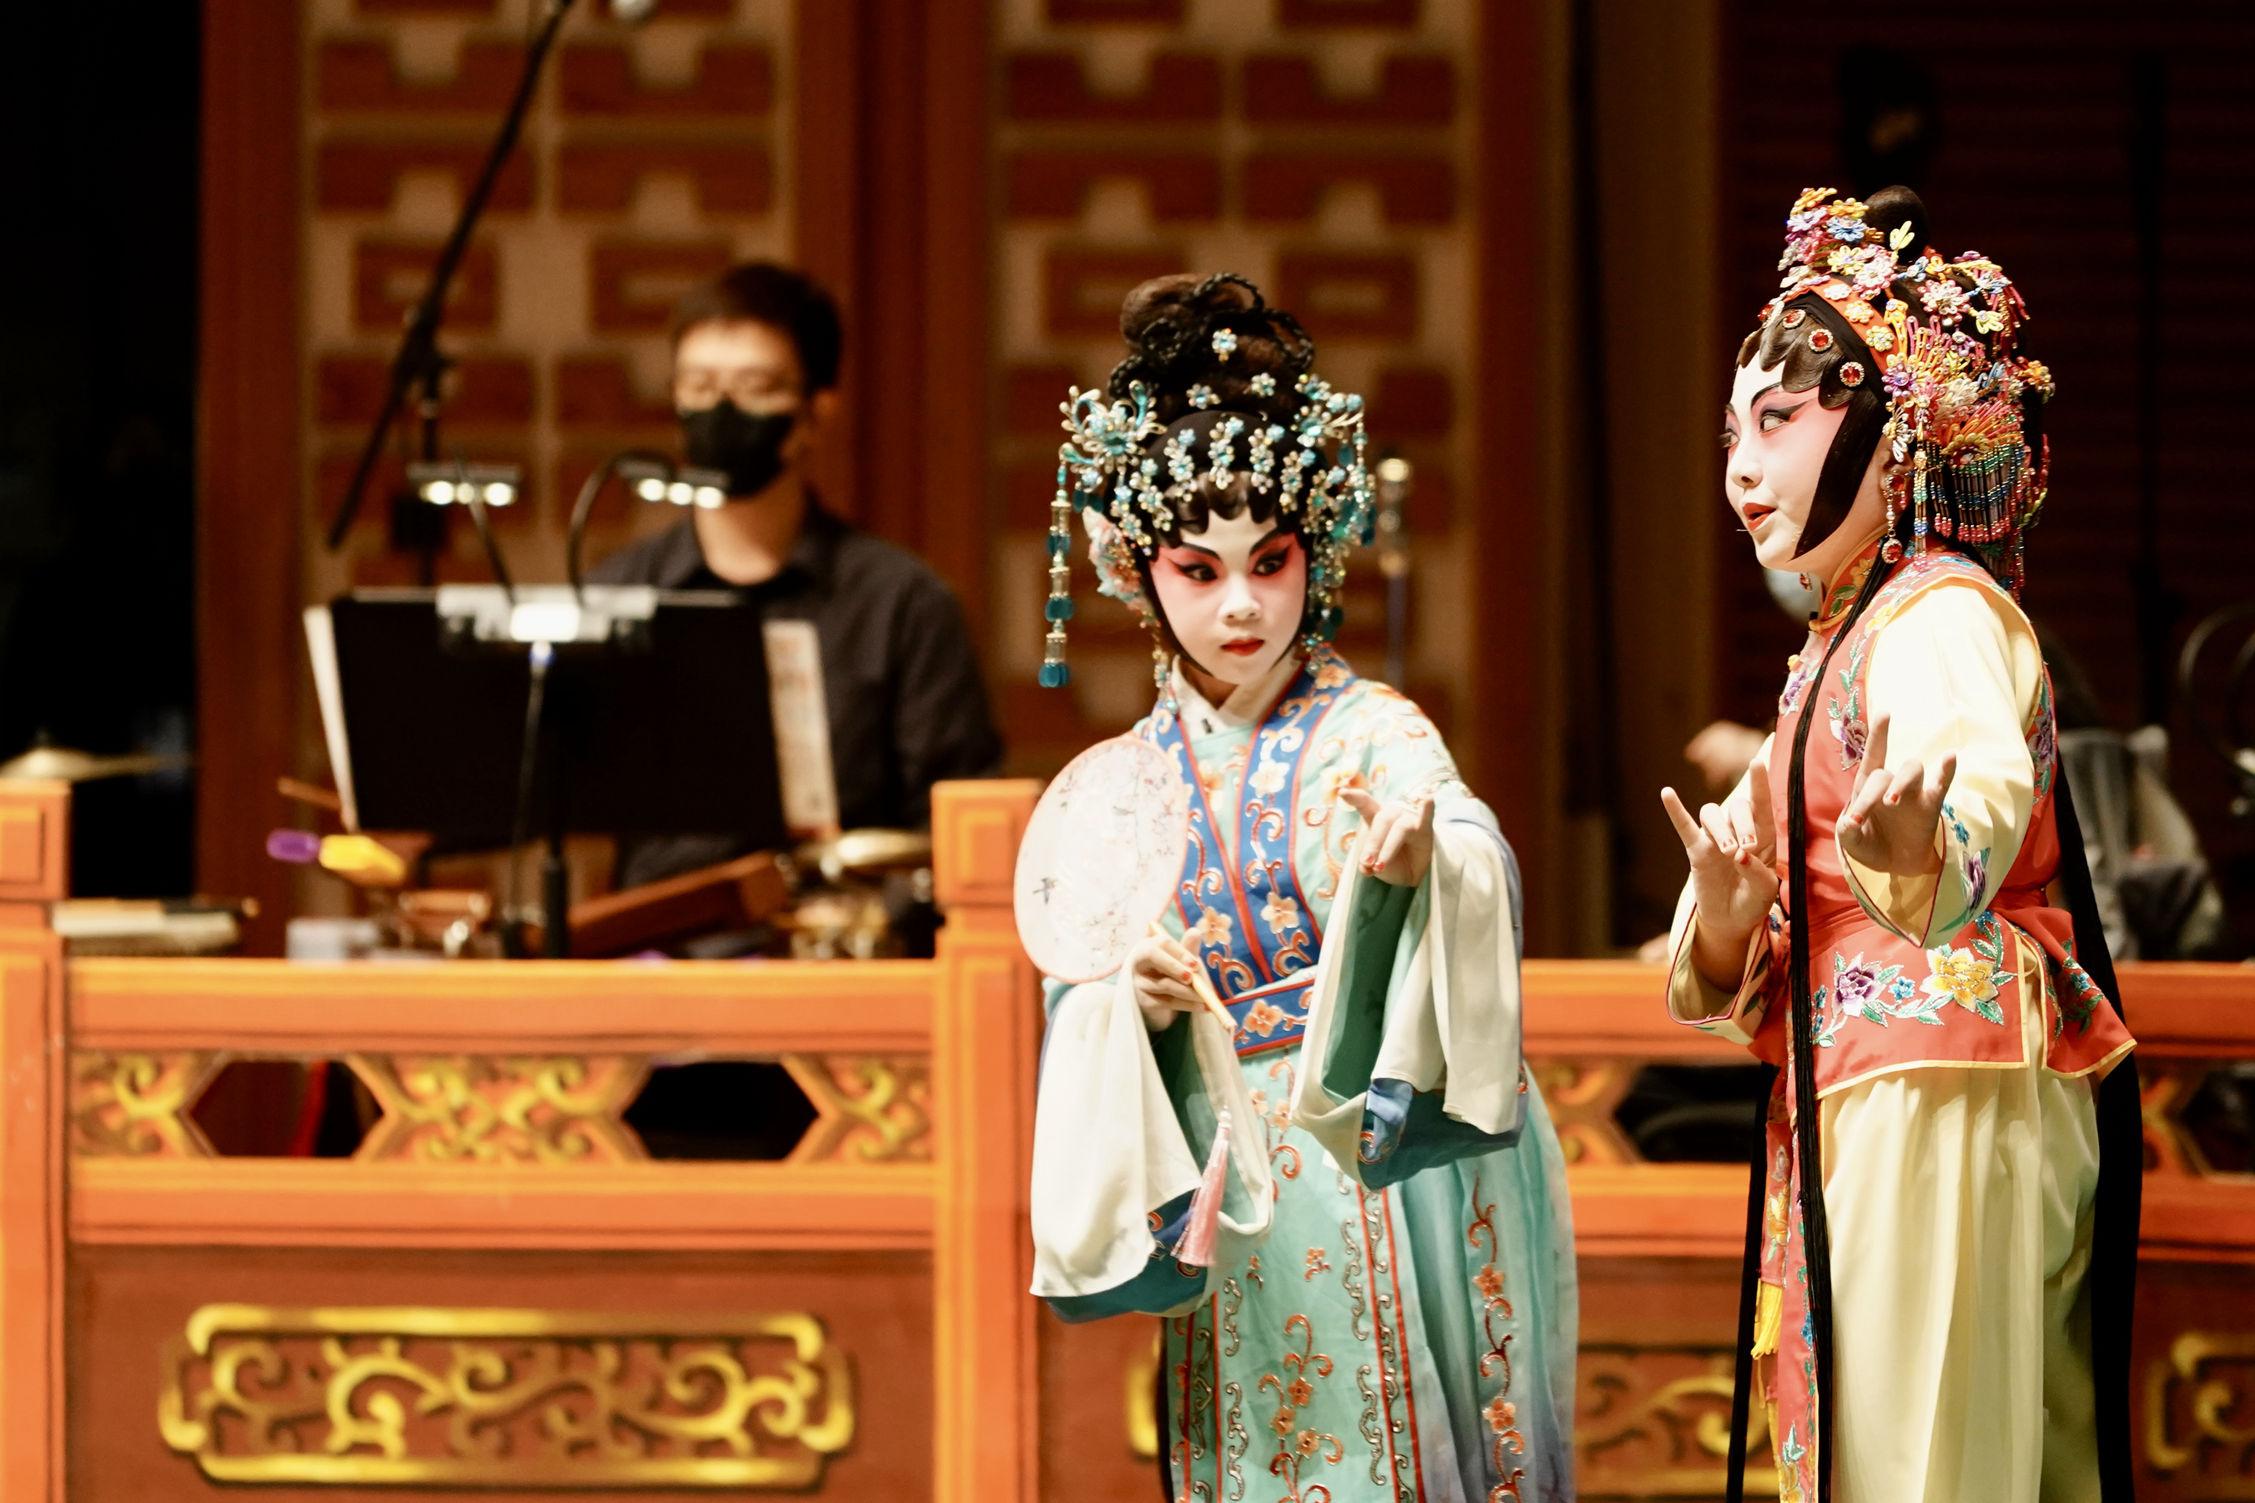 The annual Cantonese Opera Day, presented by the Leisure and Cultural Services Department, celebrated its 20th anniversary today (November 27) with an array of free activities. Photo shows young Cantonese opera talents performing onstage in the programme "Cantonese Opera Excerpts and Cantonese Operatic Songs".